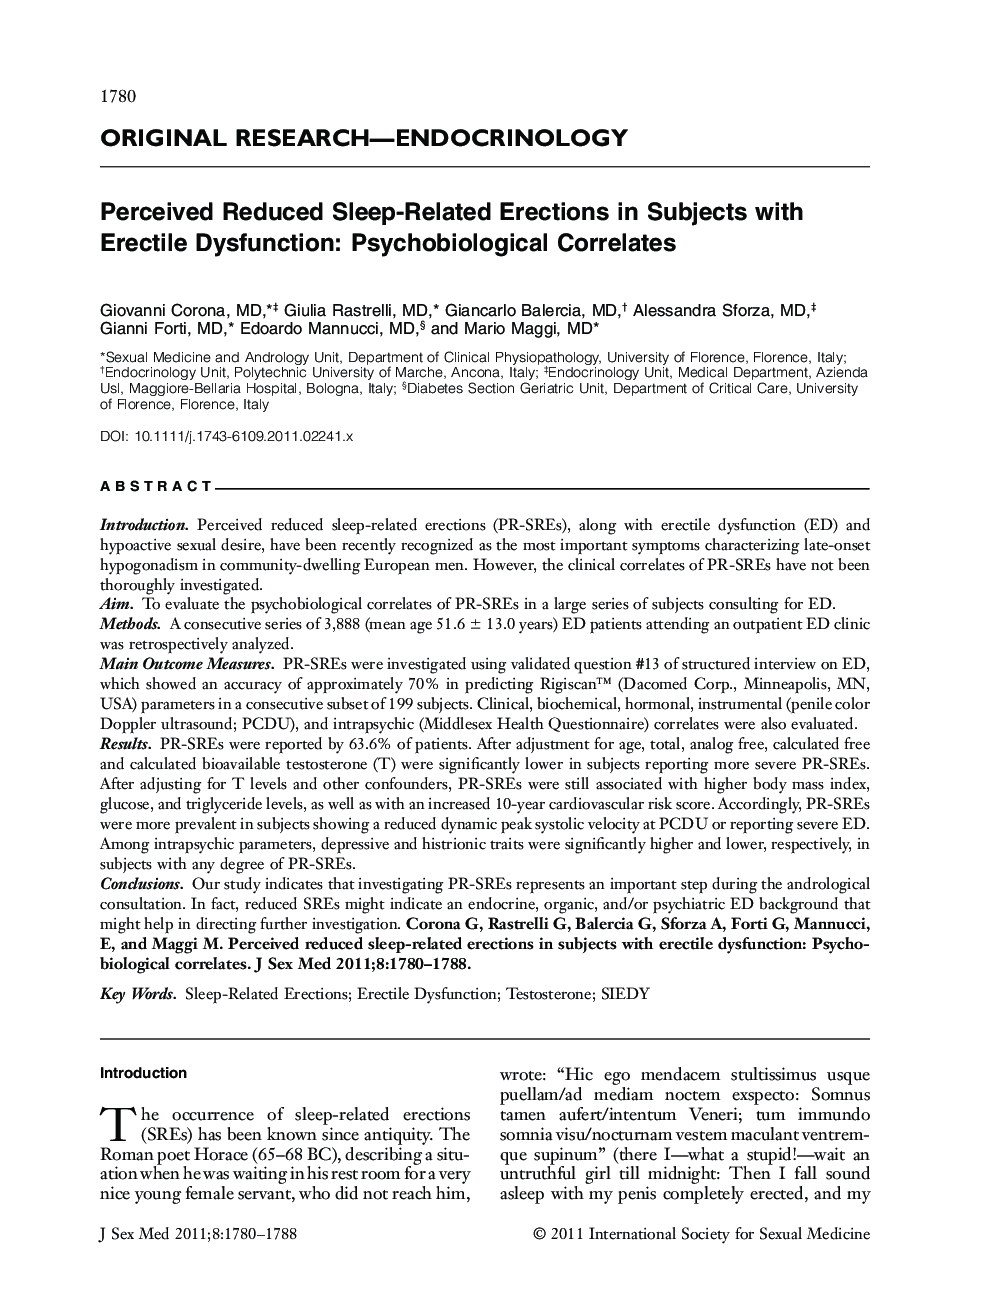 Perceived Reduced Sleep-Related Erections in Subjects with Erectile Dysfunction: Psychobiological Correlates